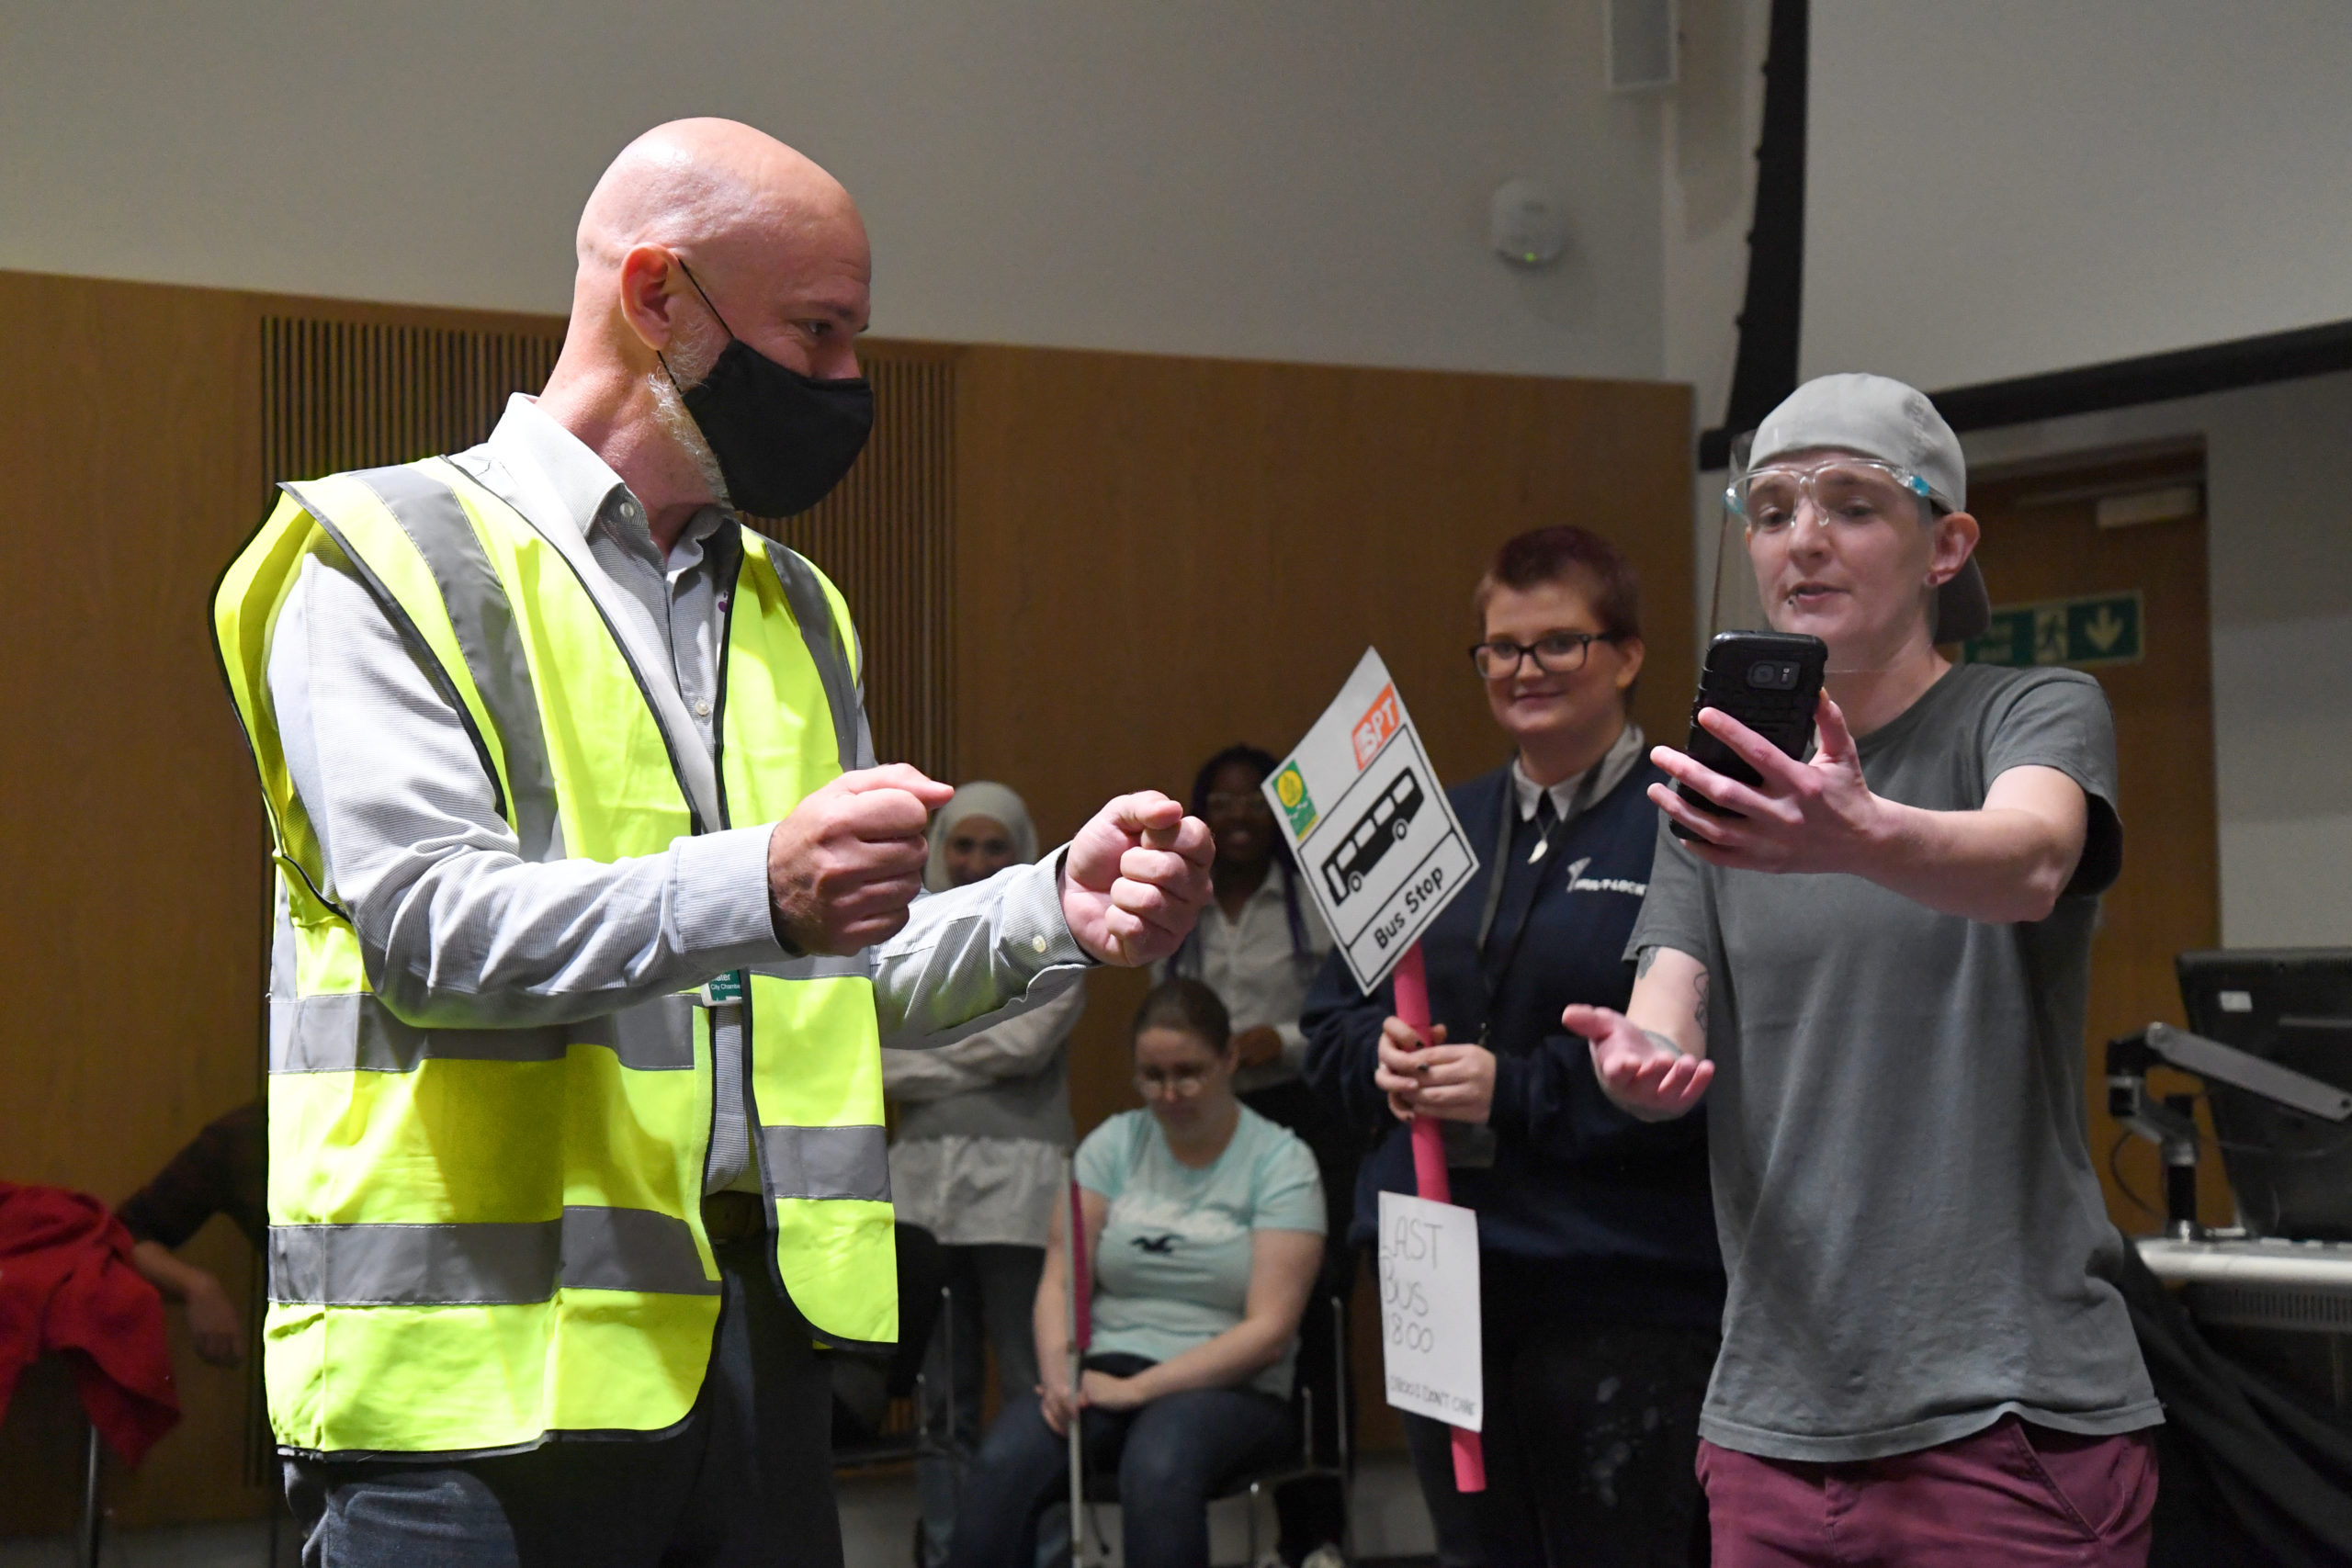 The Council’s Head of Sustainability, Gavin Slater, works with young people as part of the Democracy Pioneers project.